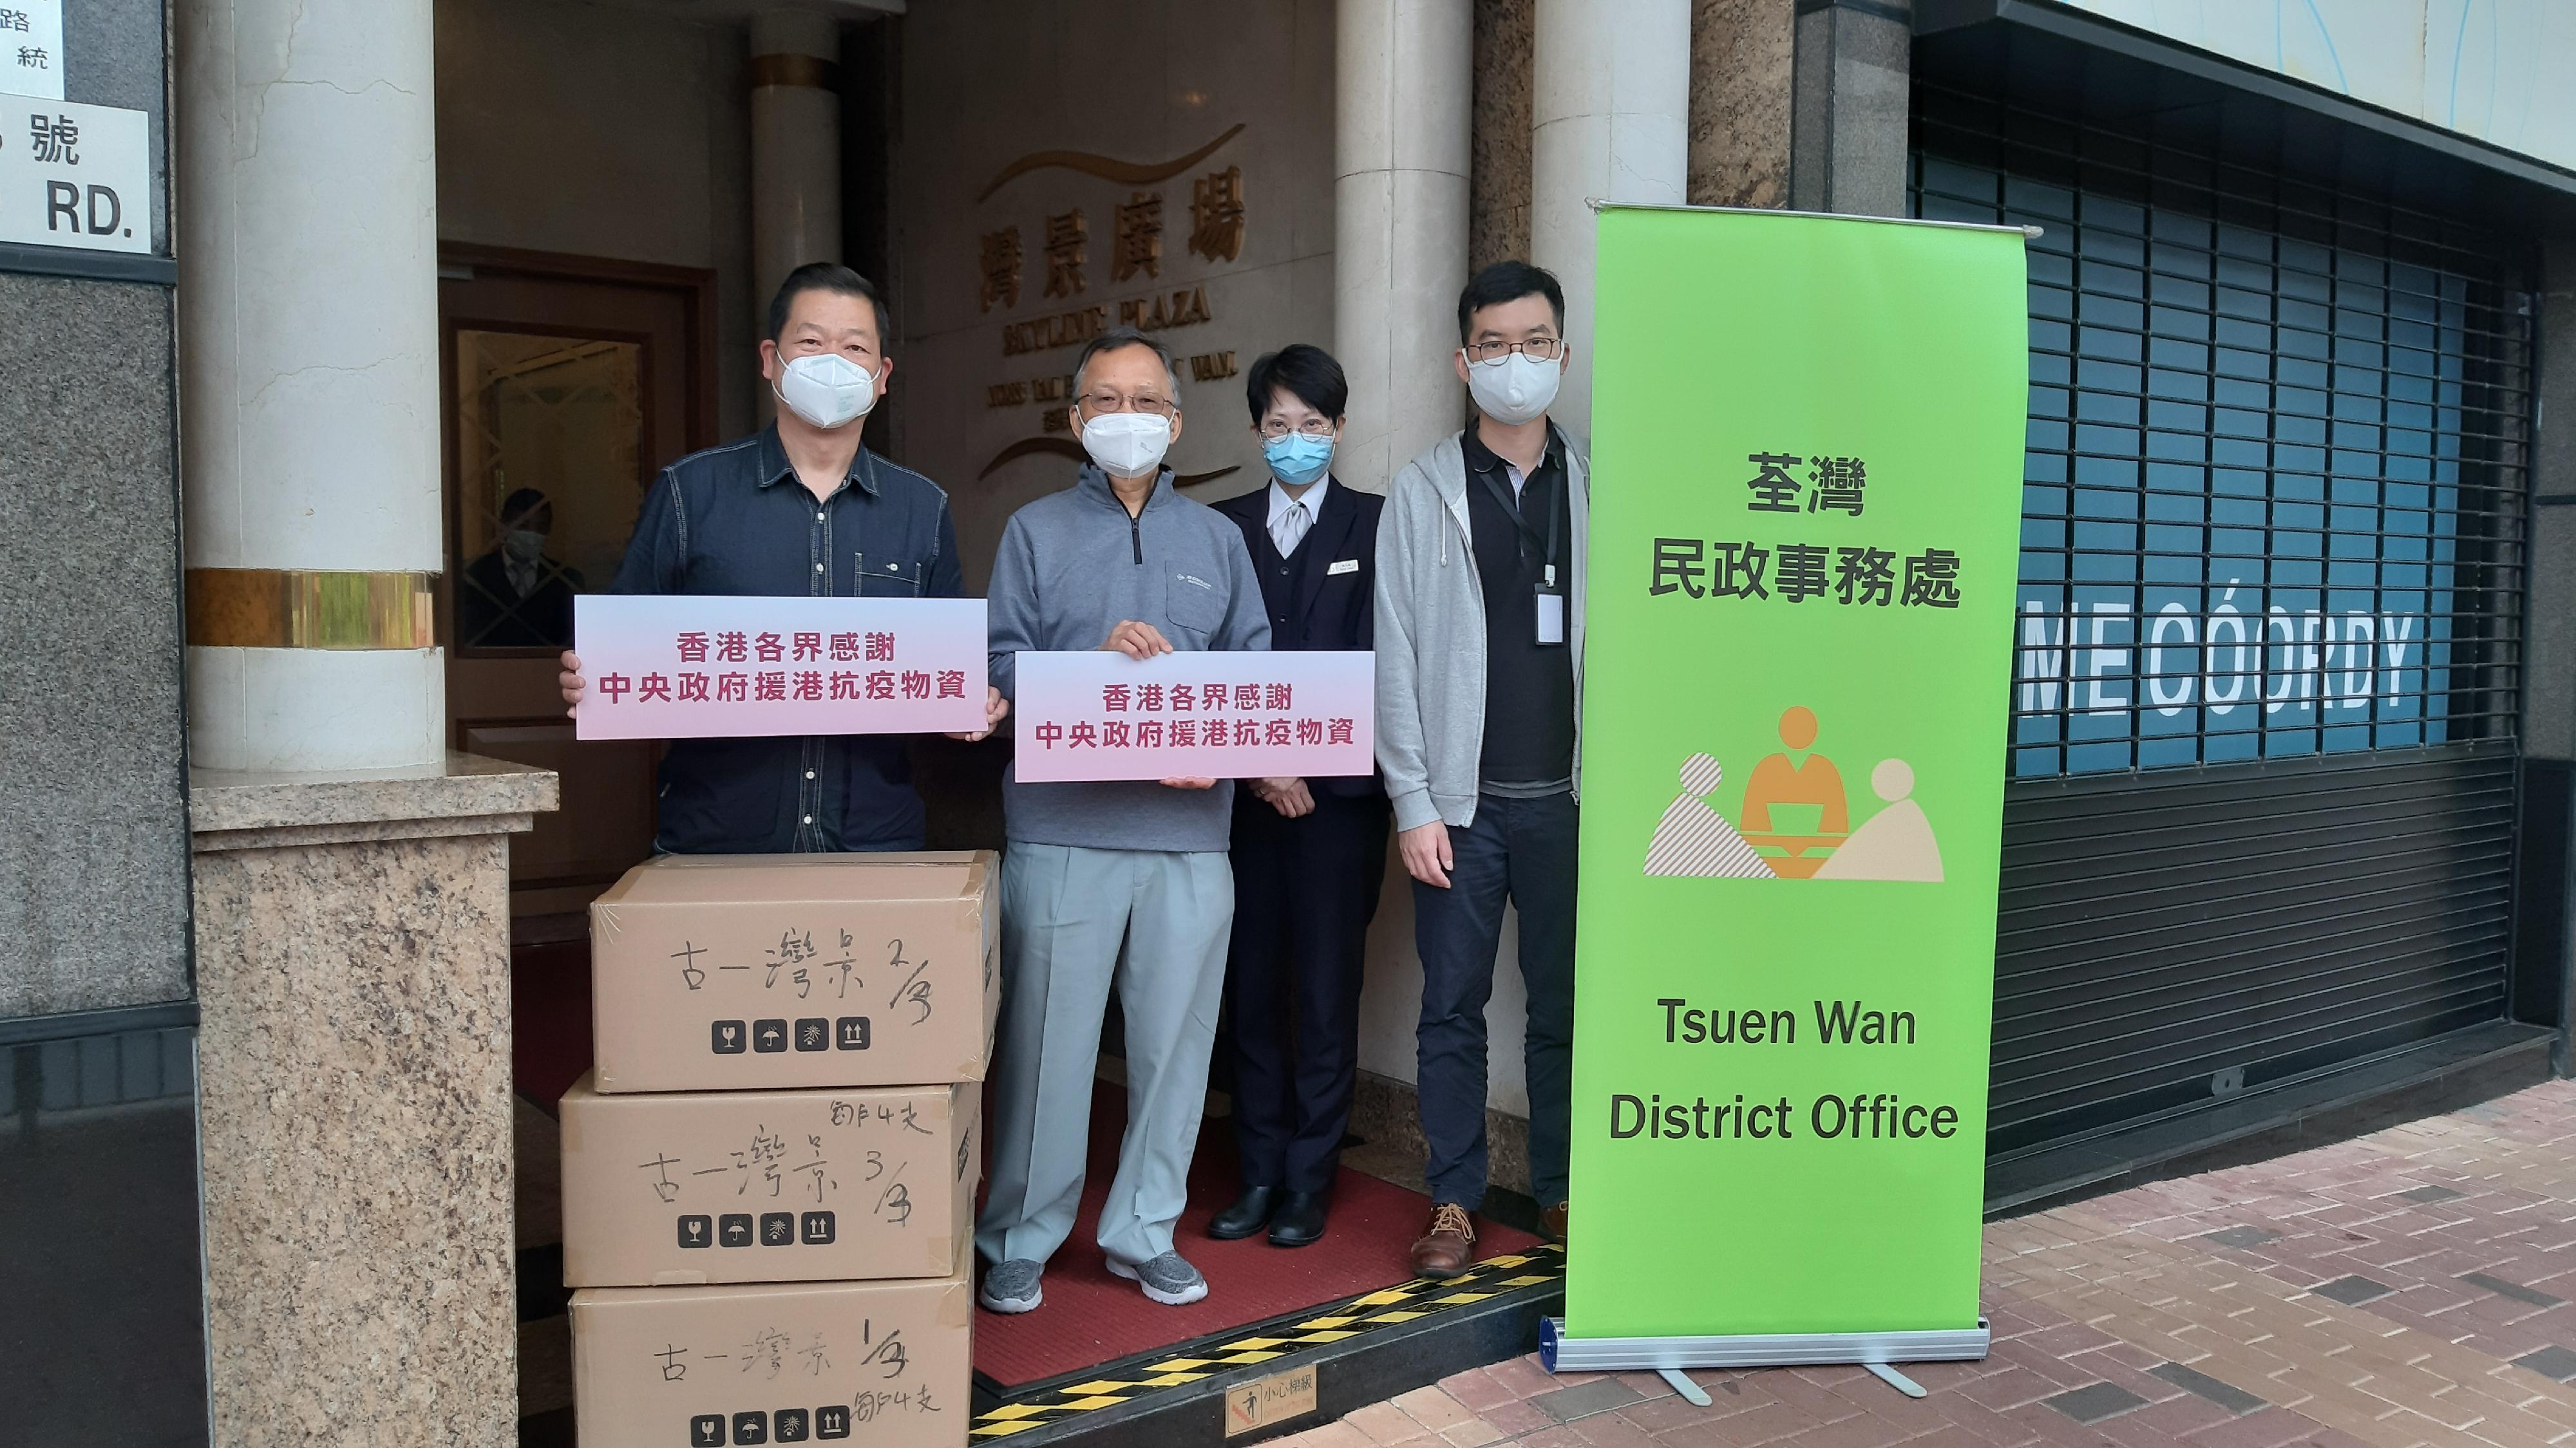 The Tsuen Wan District Office today (March 28) distributed COVID-19 rapid test kits to households, cleansing workers and property management staff living and working in Skyline Plaza for voluntary testing through the property management company.